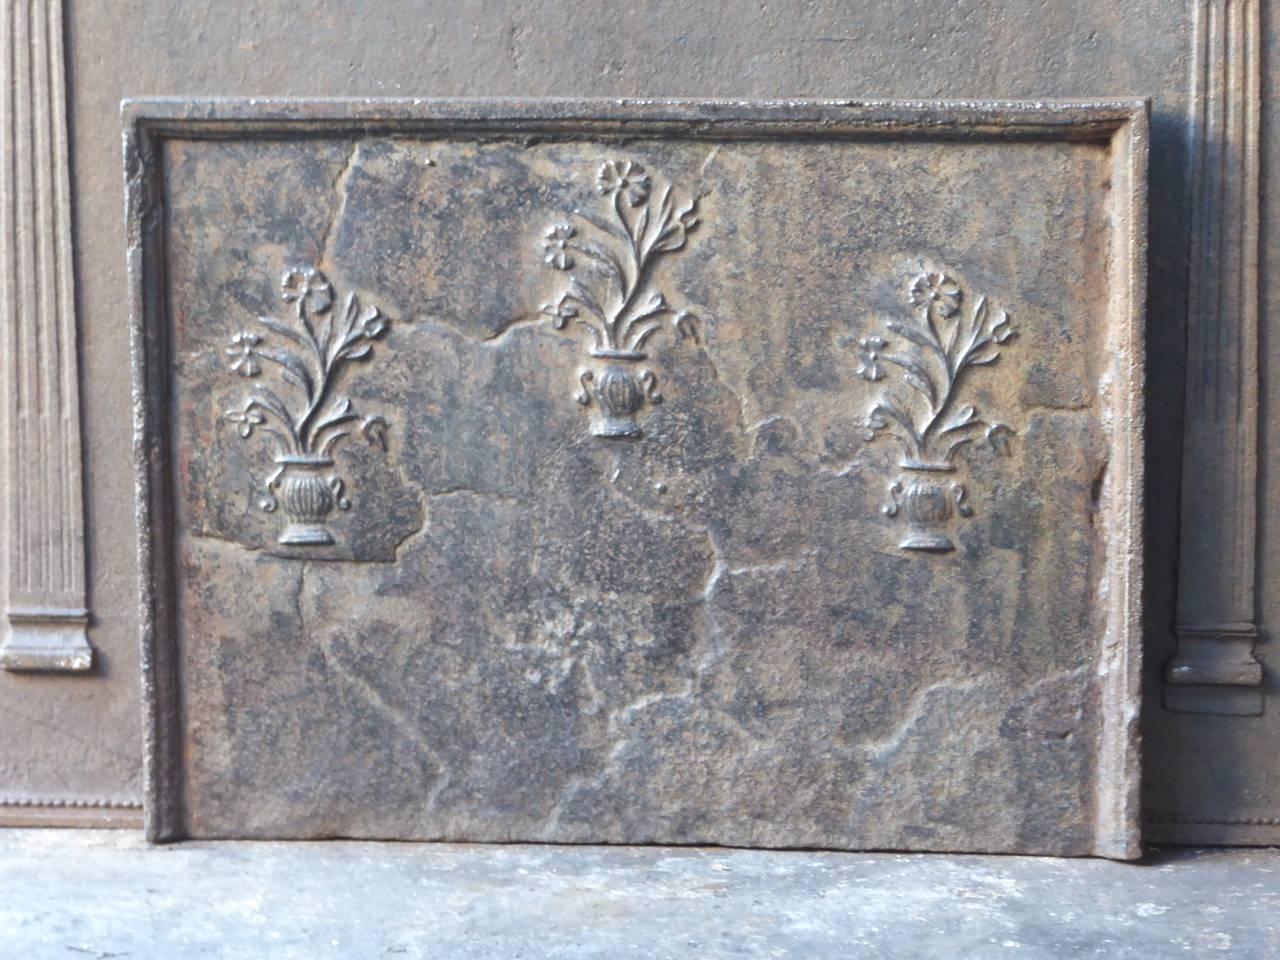 18th century French fireplace fireback with three flower baskets.